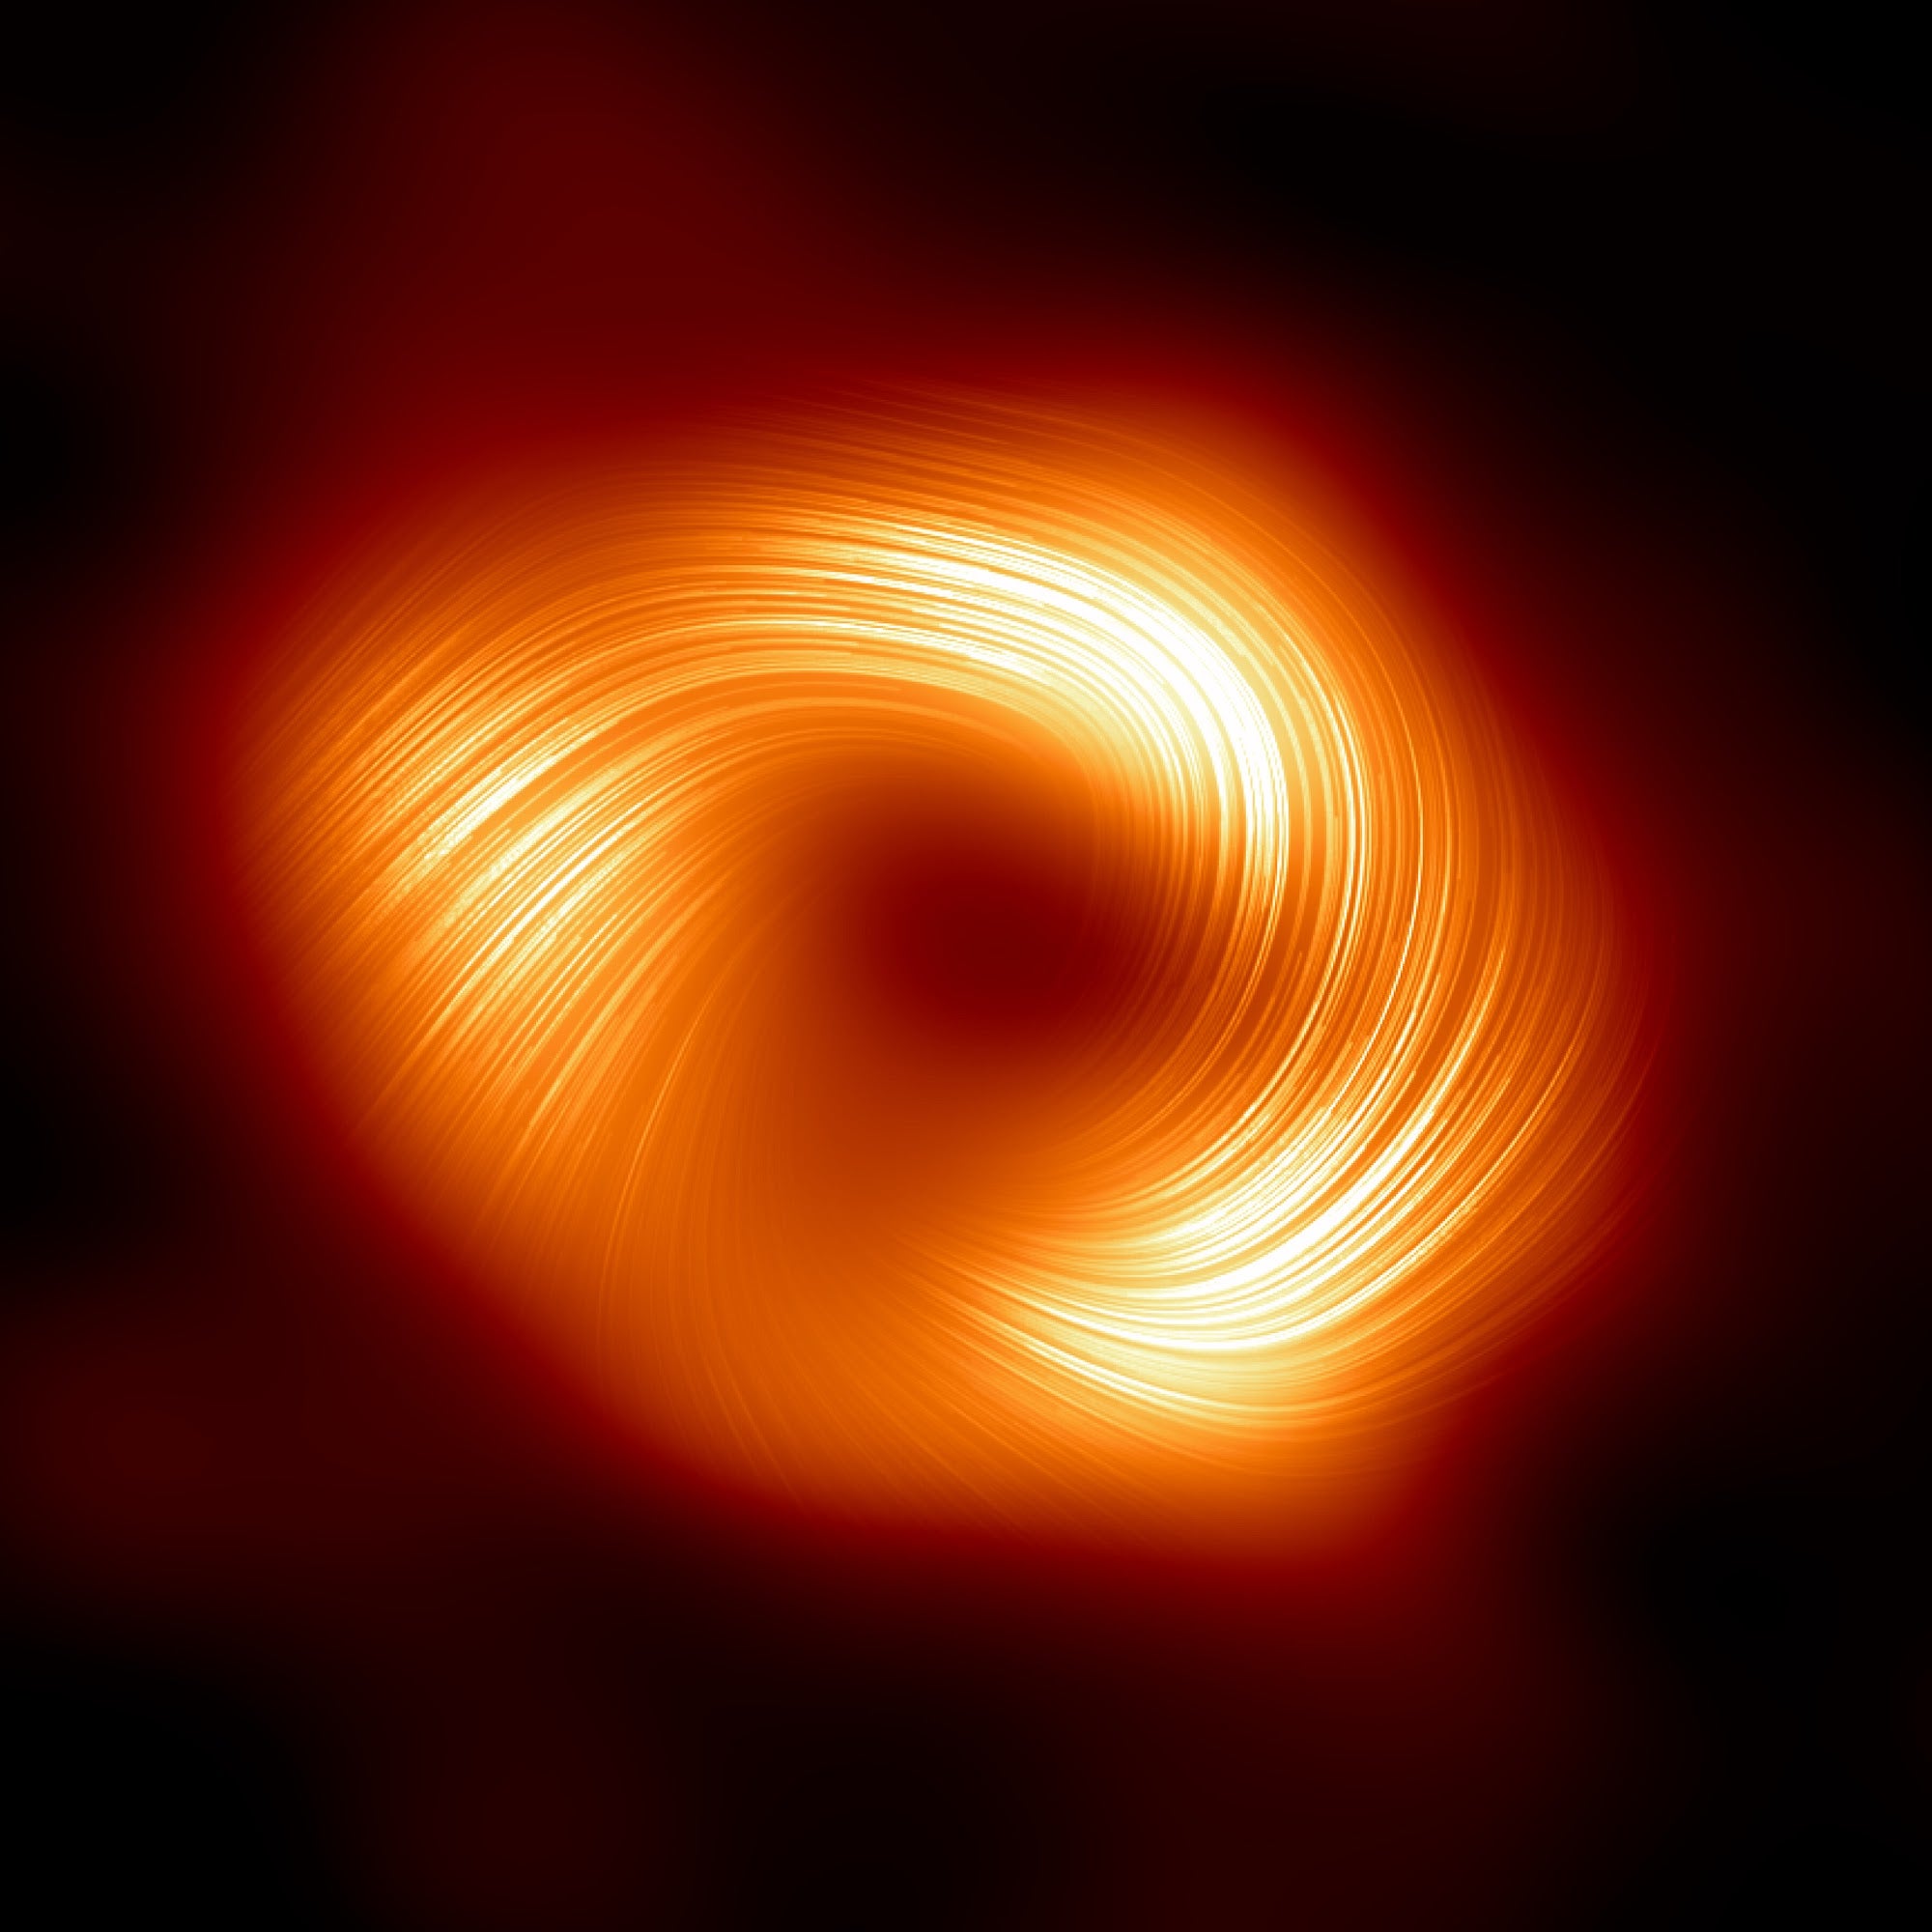 scientists reveal astonishing image of black hole in our galaxy